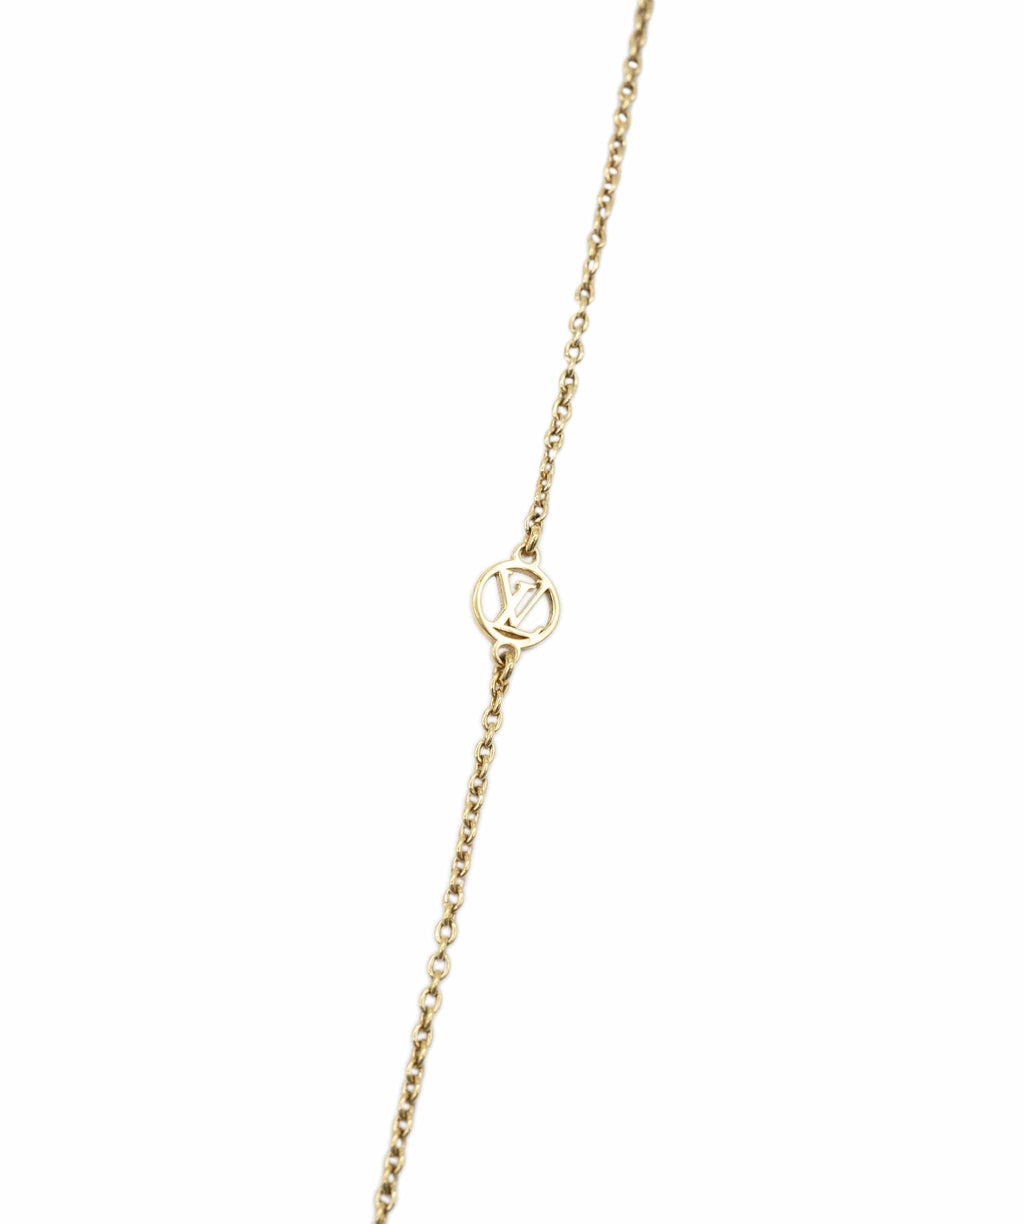 LOUIS VUITTON M68125 monogram logo Flower full Necklace Gold Plated Gold